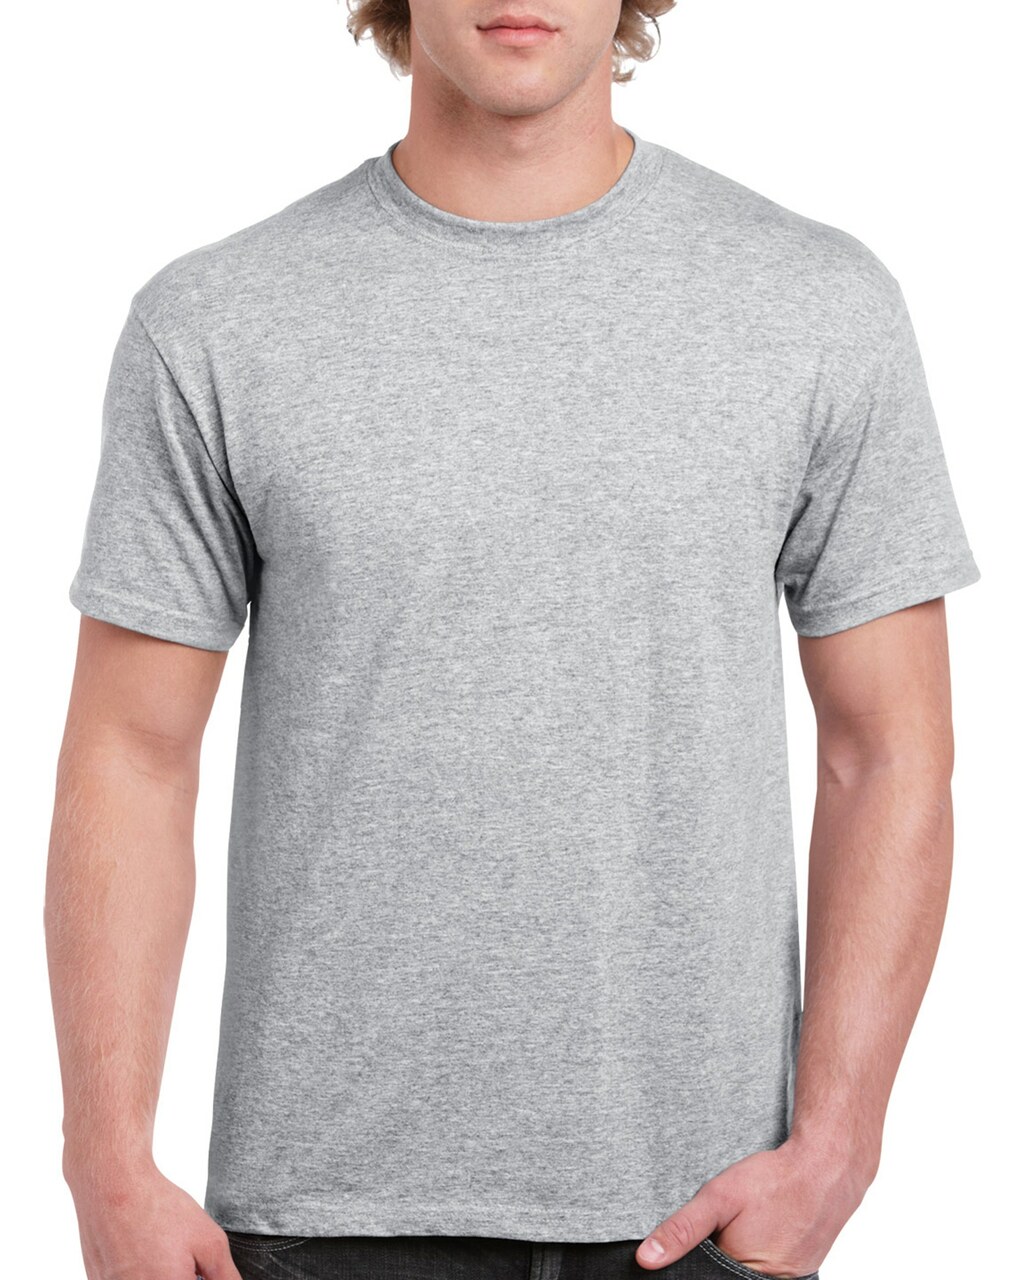 PLAIN DARK GREY USA T-SHIRT -UNFORGETTABLE GIFT- AMERICAN T-SHIRT -TOP QUALITY-LOWEST PRICE GAURANTEED-DO NOT MISS THIS CHANCE-FREE HOME(POST OFFICE) DELIVERY-ART NO. 64000-REA 28%